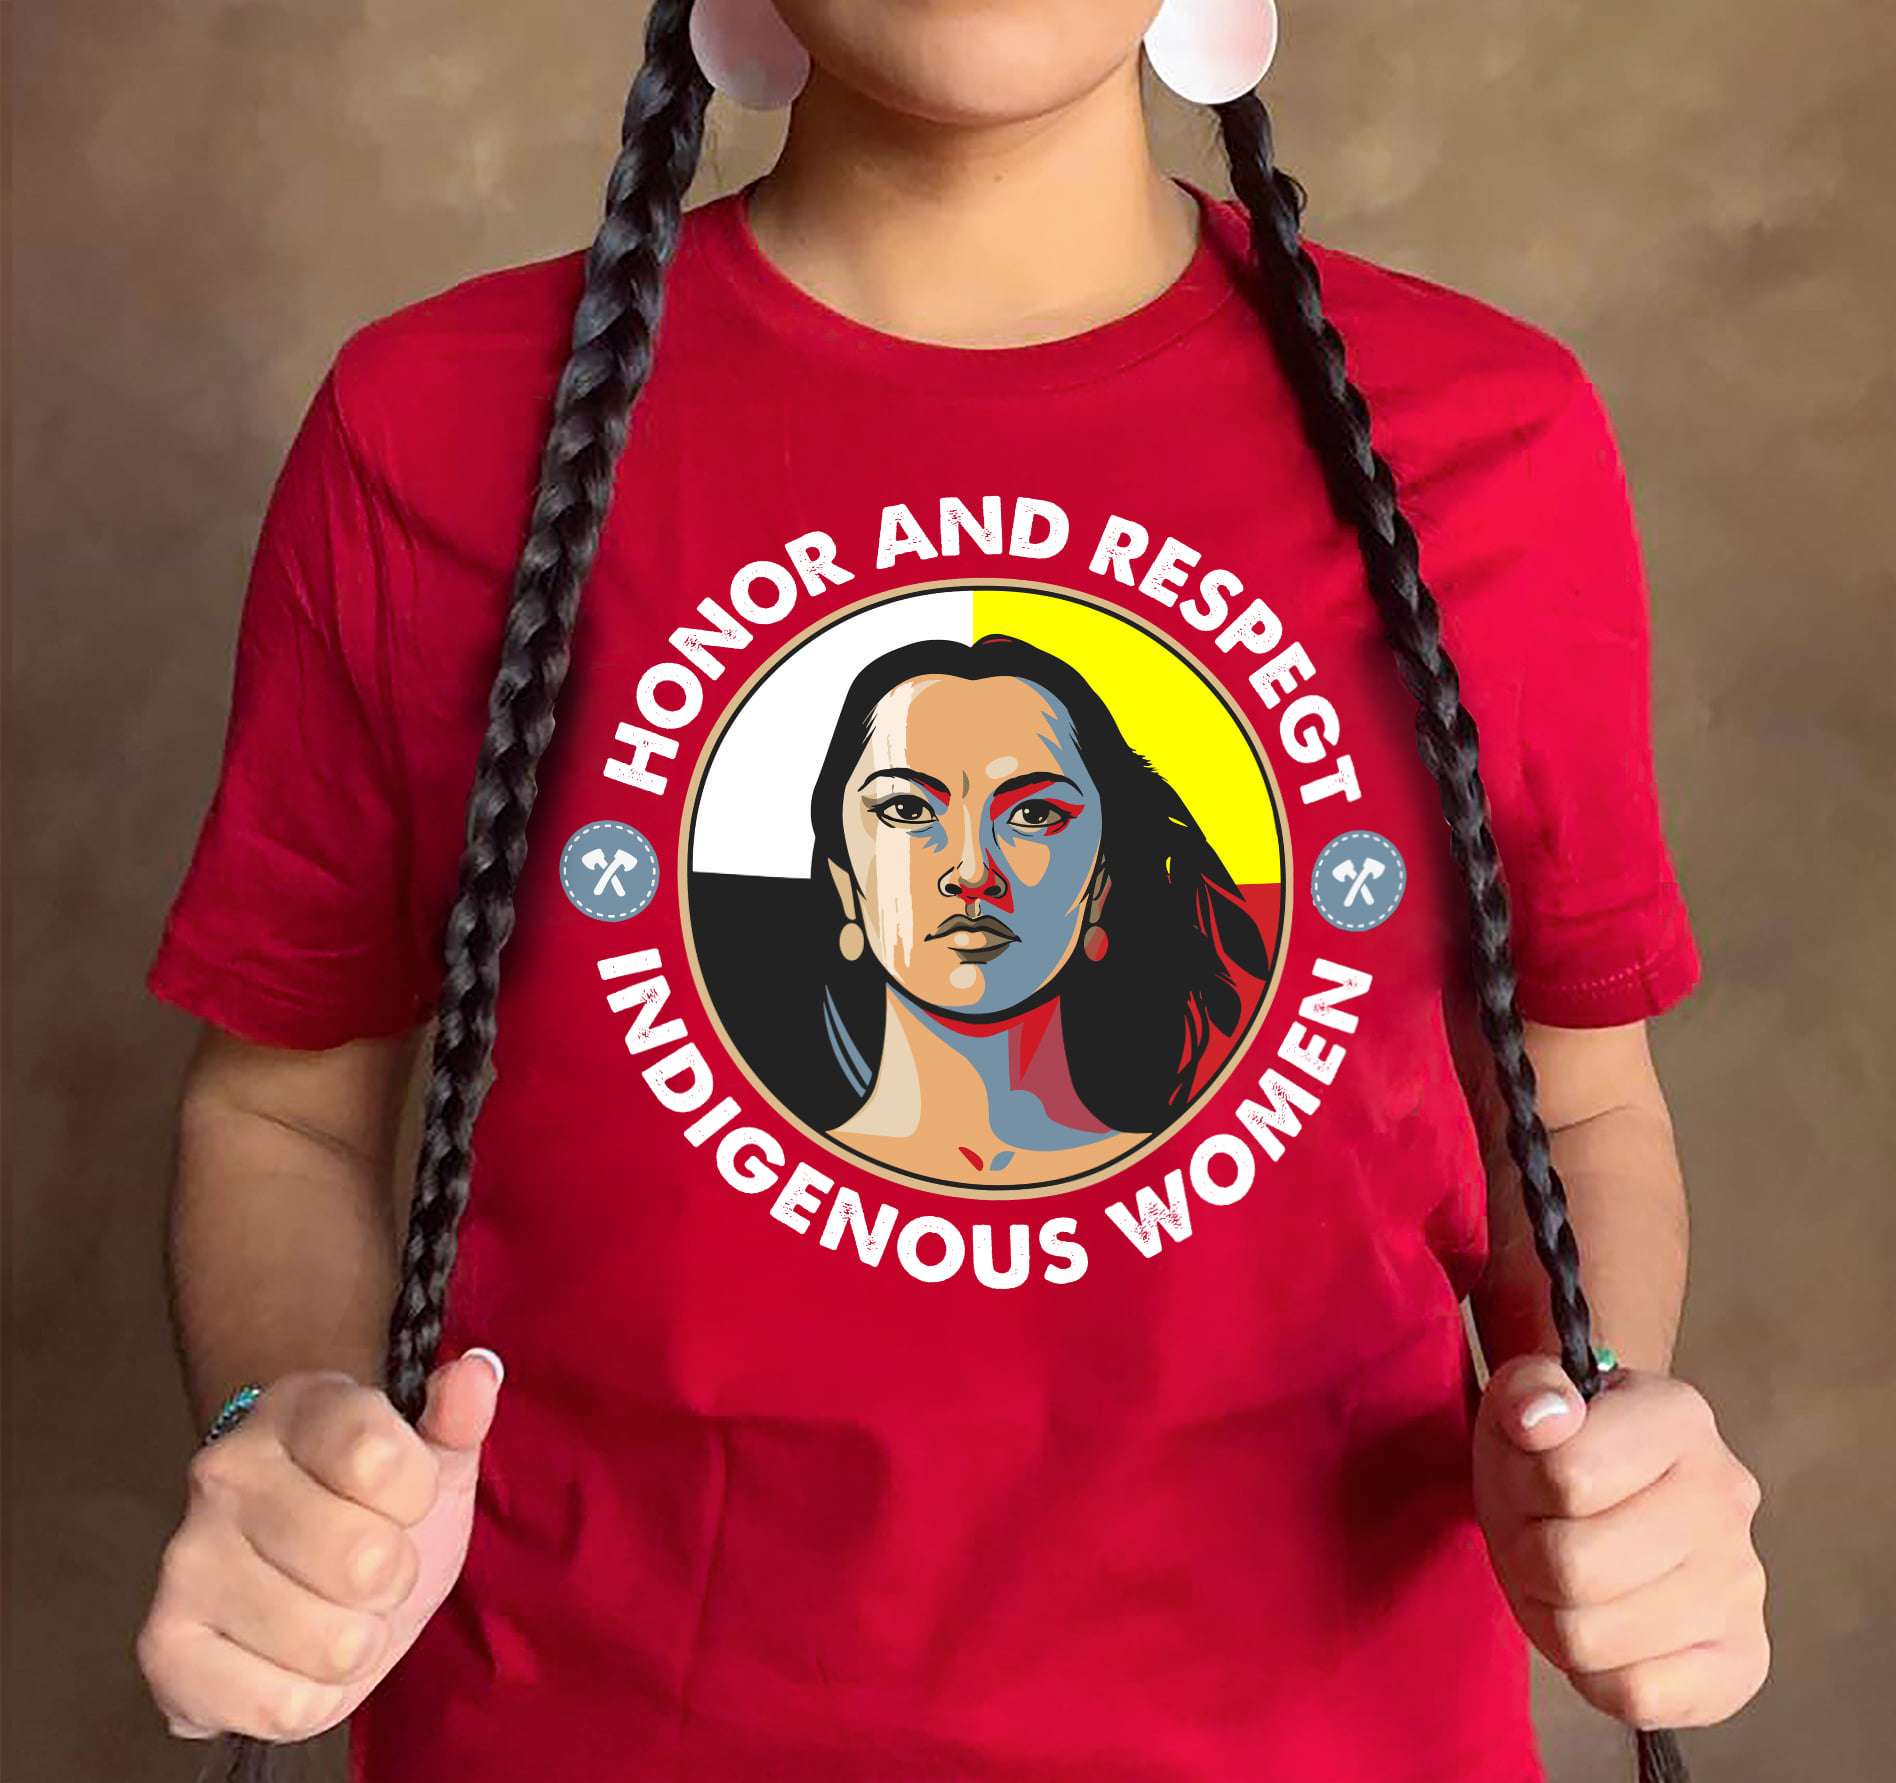 Honor and respect - Indigenous women, native american woman